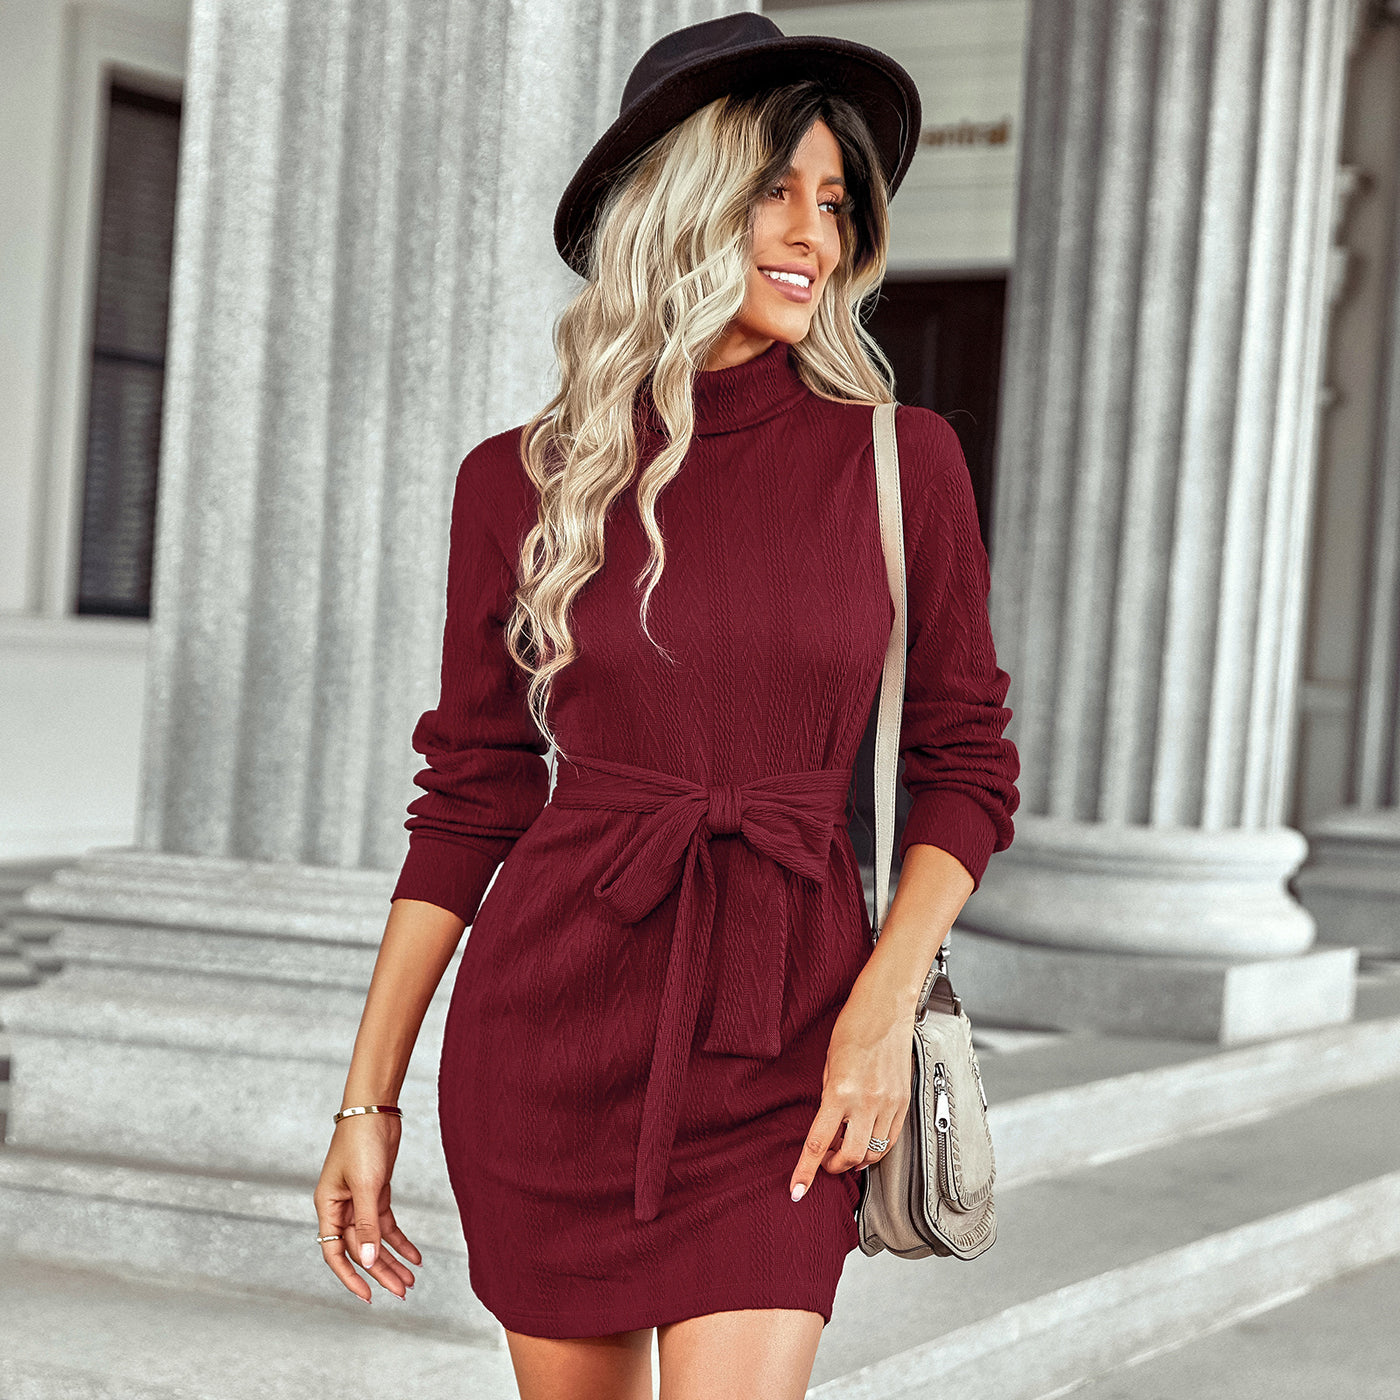 Autumn Winter Embroidered Dress Women Clothing Thermal Turtleneck Lace-up Sheath Dress